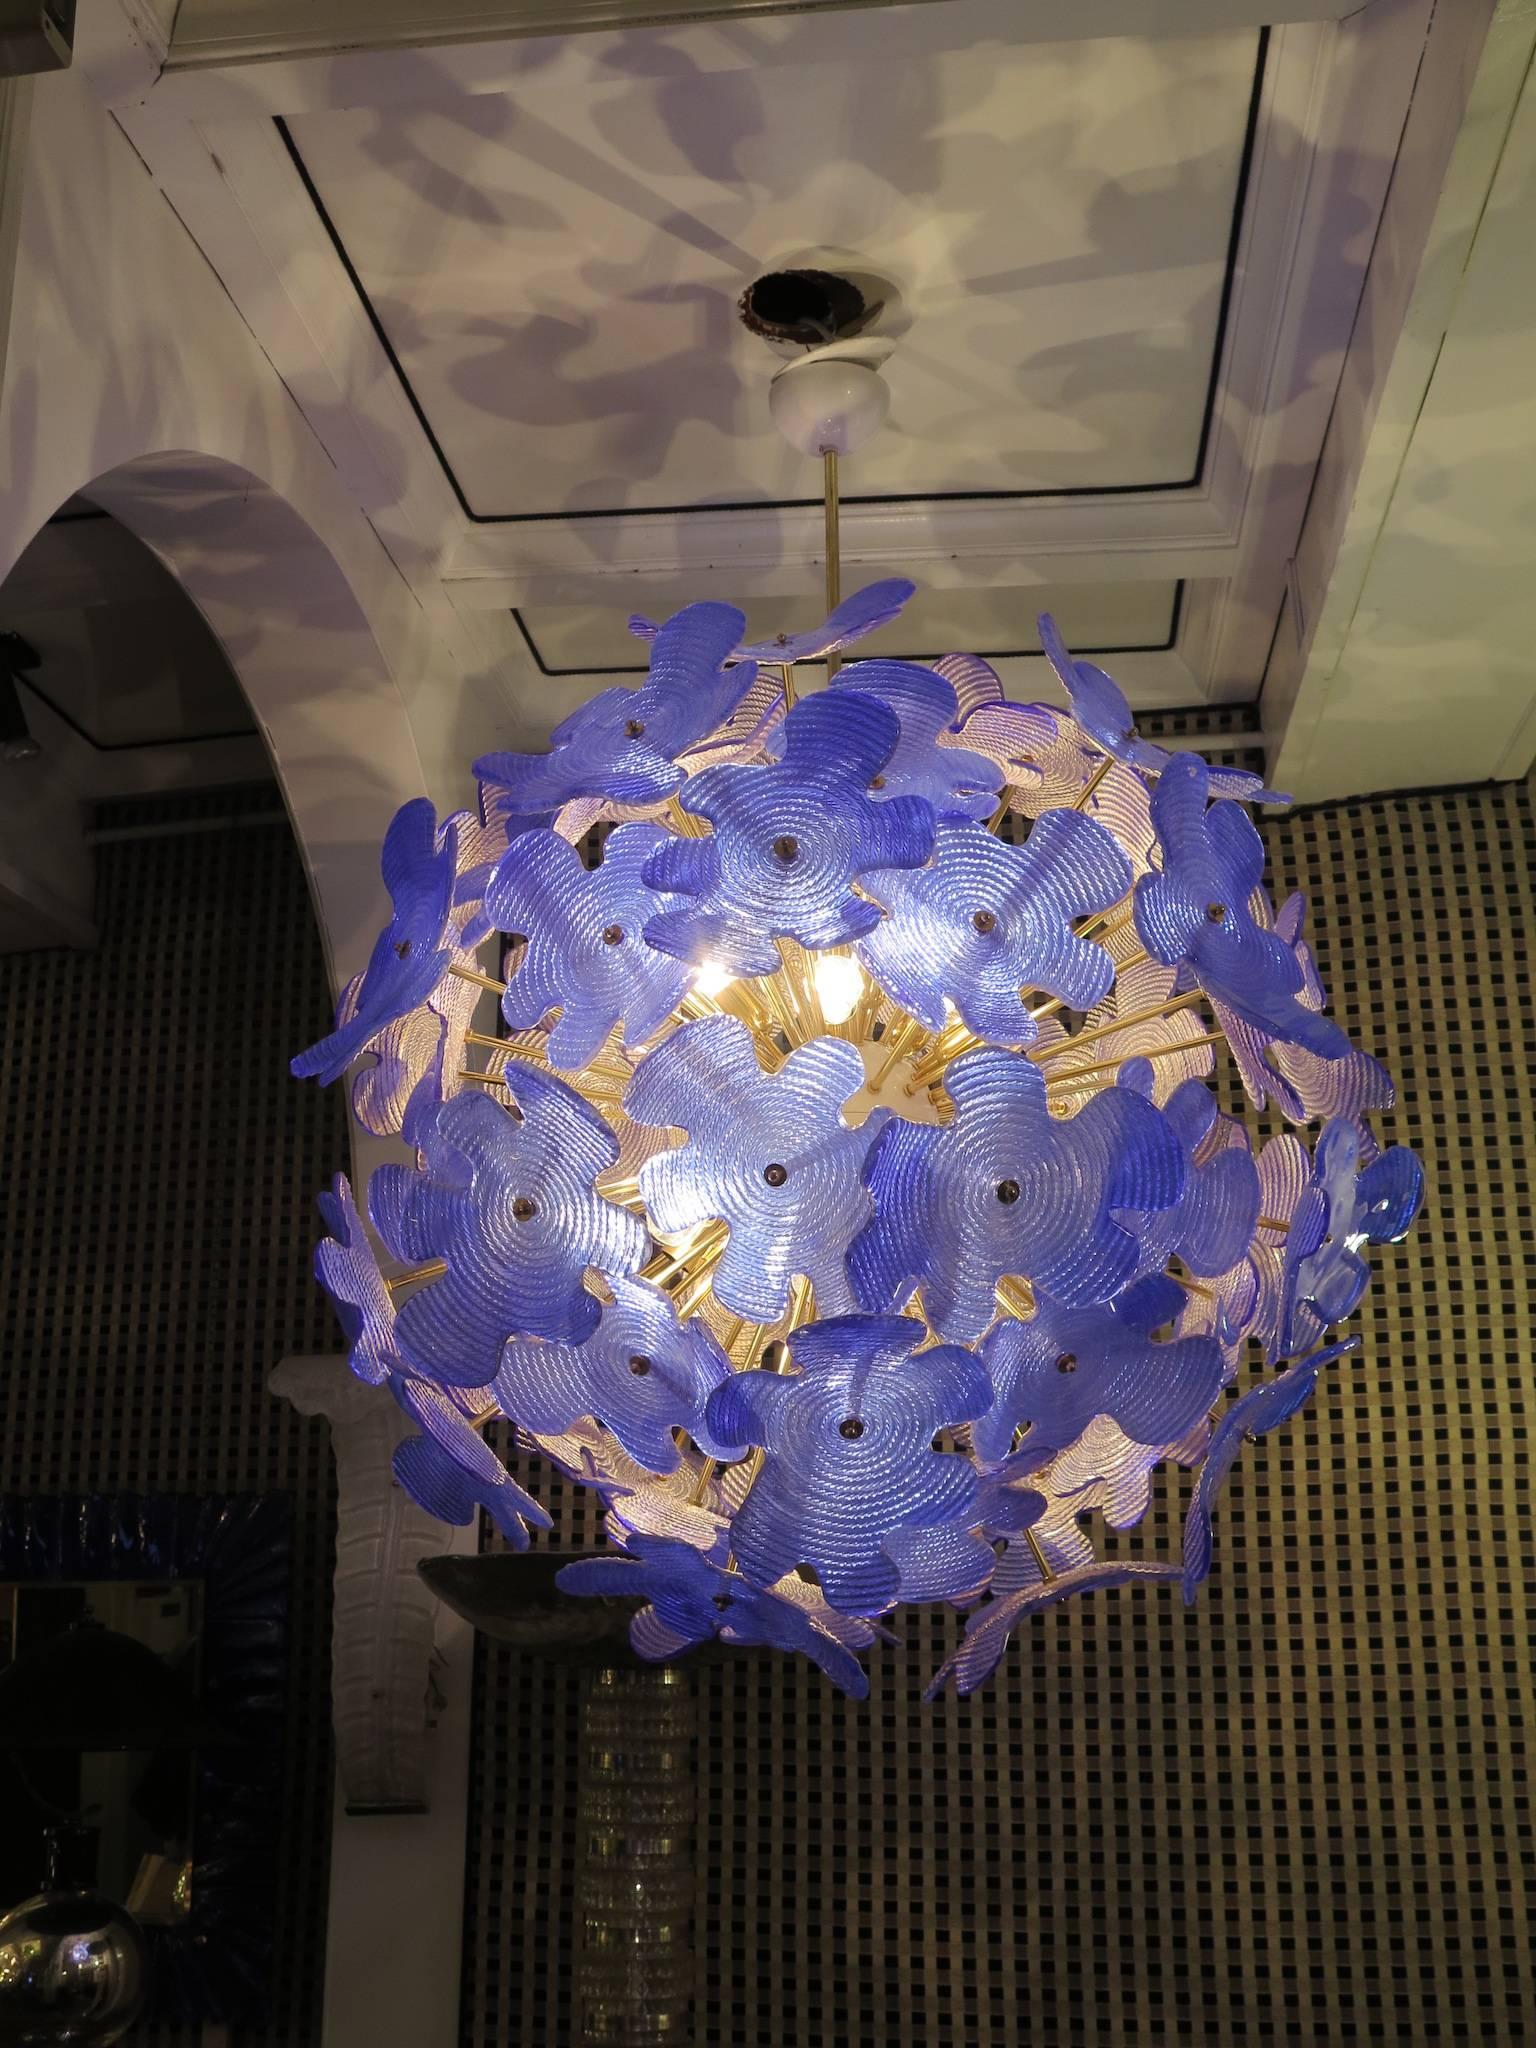 The large glass flowers make up this Murano chandelier from the 1970. A classic Sputnik from the middle of the century.

Made of a large central sphere in which brass rods are screwed, glass leaves are placed above the brass rods. It has 18-light